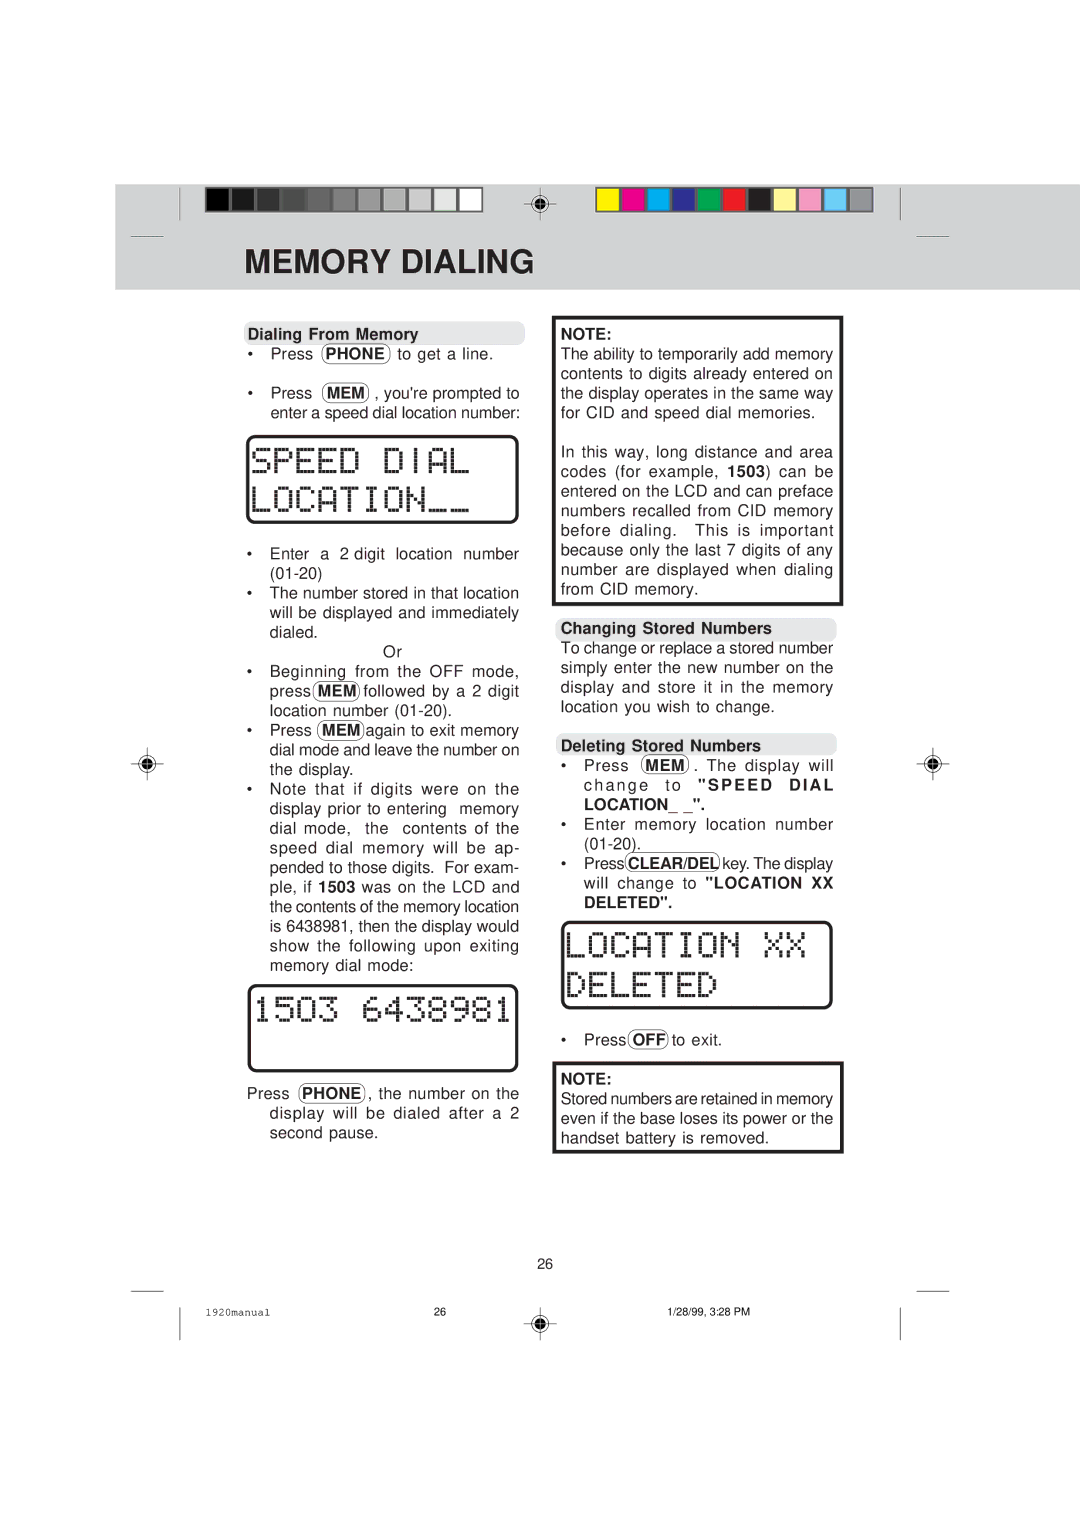 VTech VT 1920C manual Dialing From Memory, Changing Stored Numbers, Deleting Stored Numbers, Deleted 